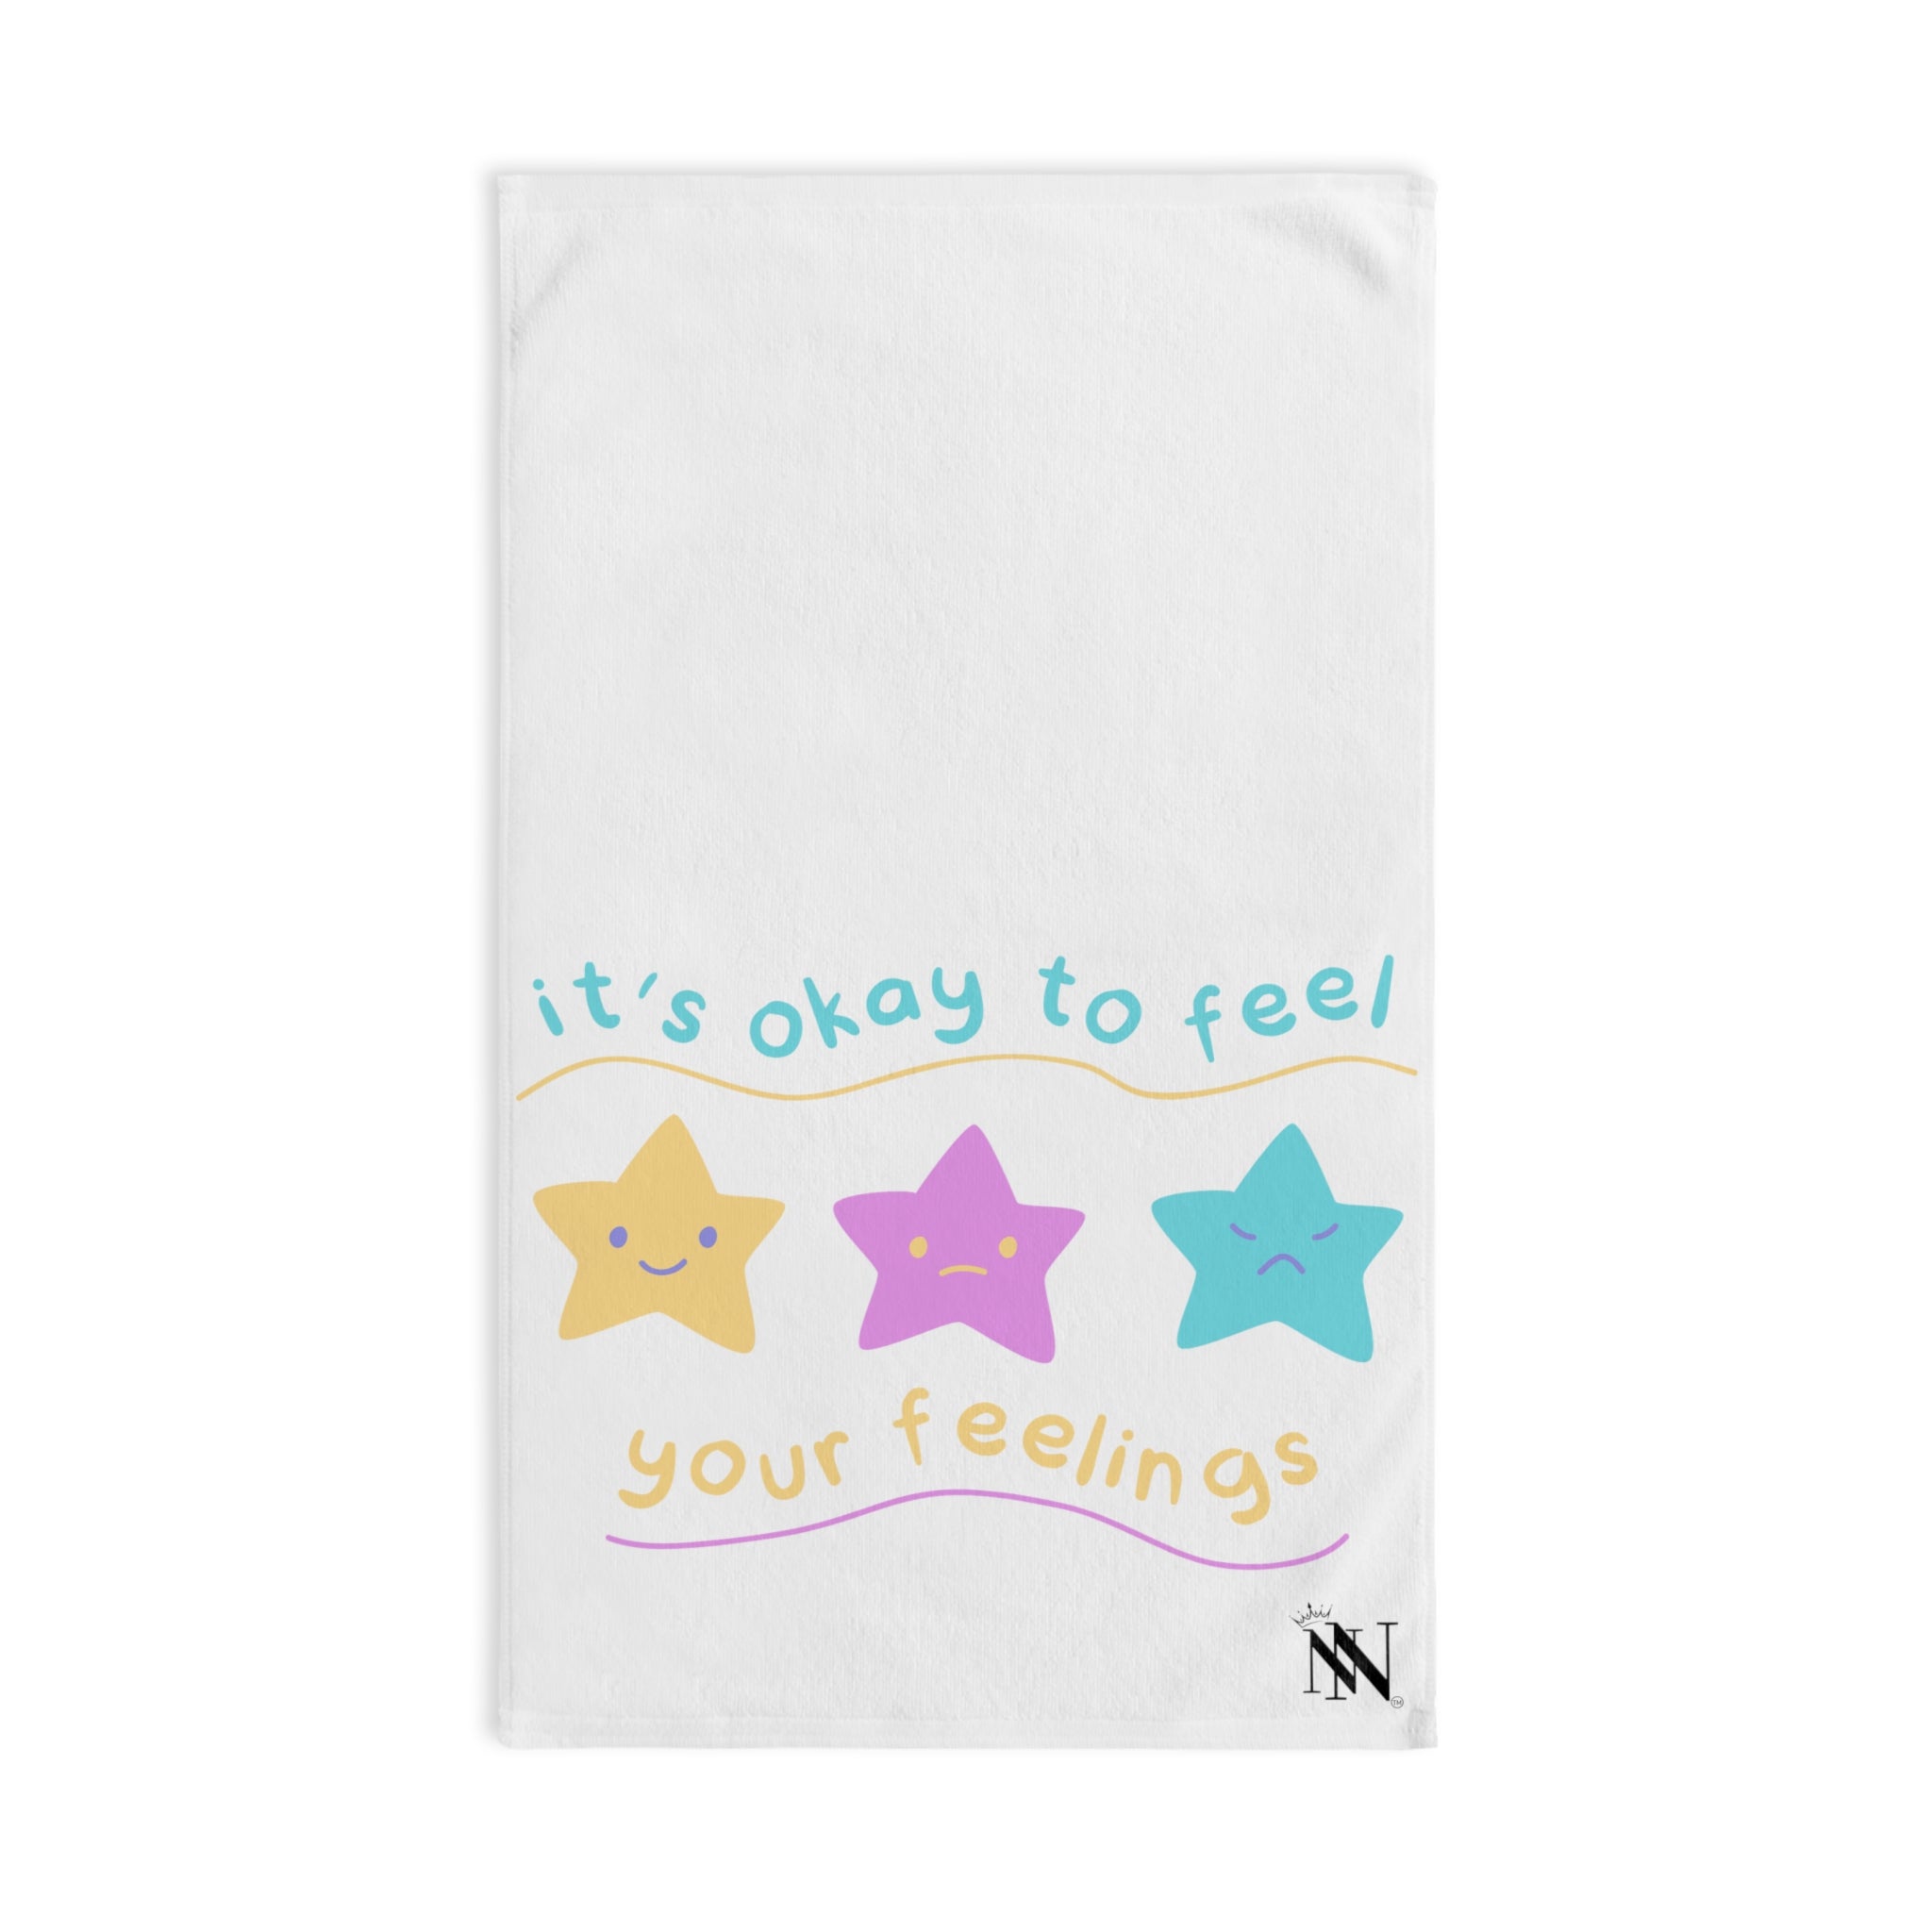 Feel Feelings Emotions White | Funny Gifts for Men - Gifts for Him - Birthday Gifts for Men, Him, Her, Husband, Boyfriend, Girlfriend, New Couple Gifts, Fathers & Valentines Day Gifts, Christmas Gifts NECTAR NAPKINS